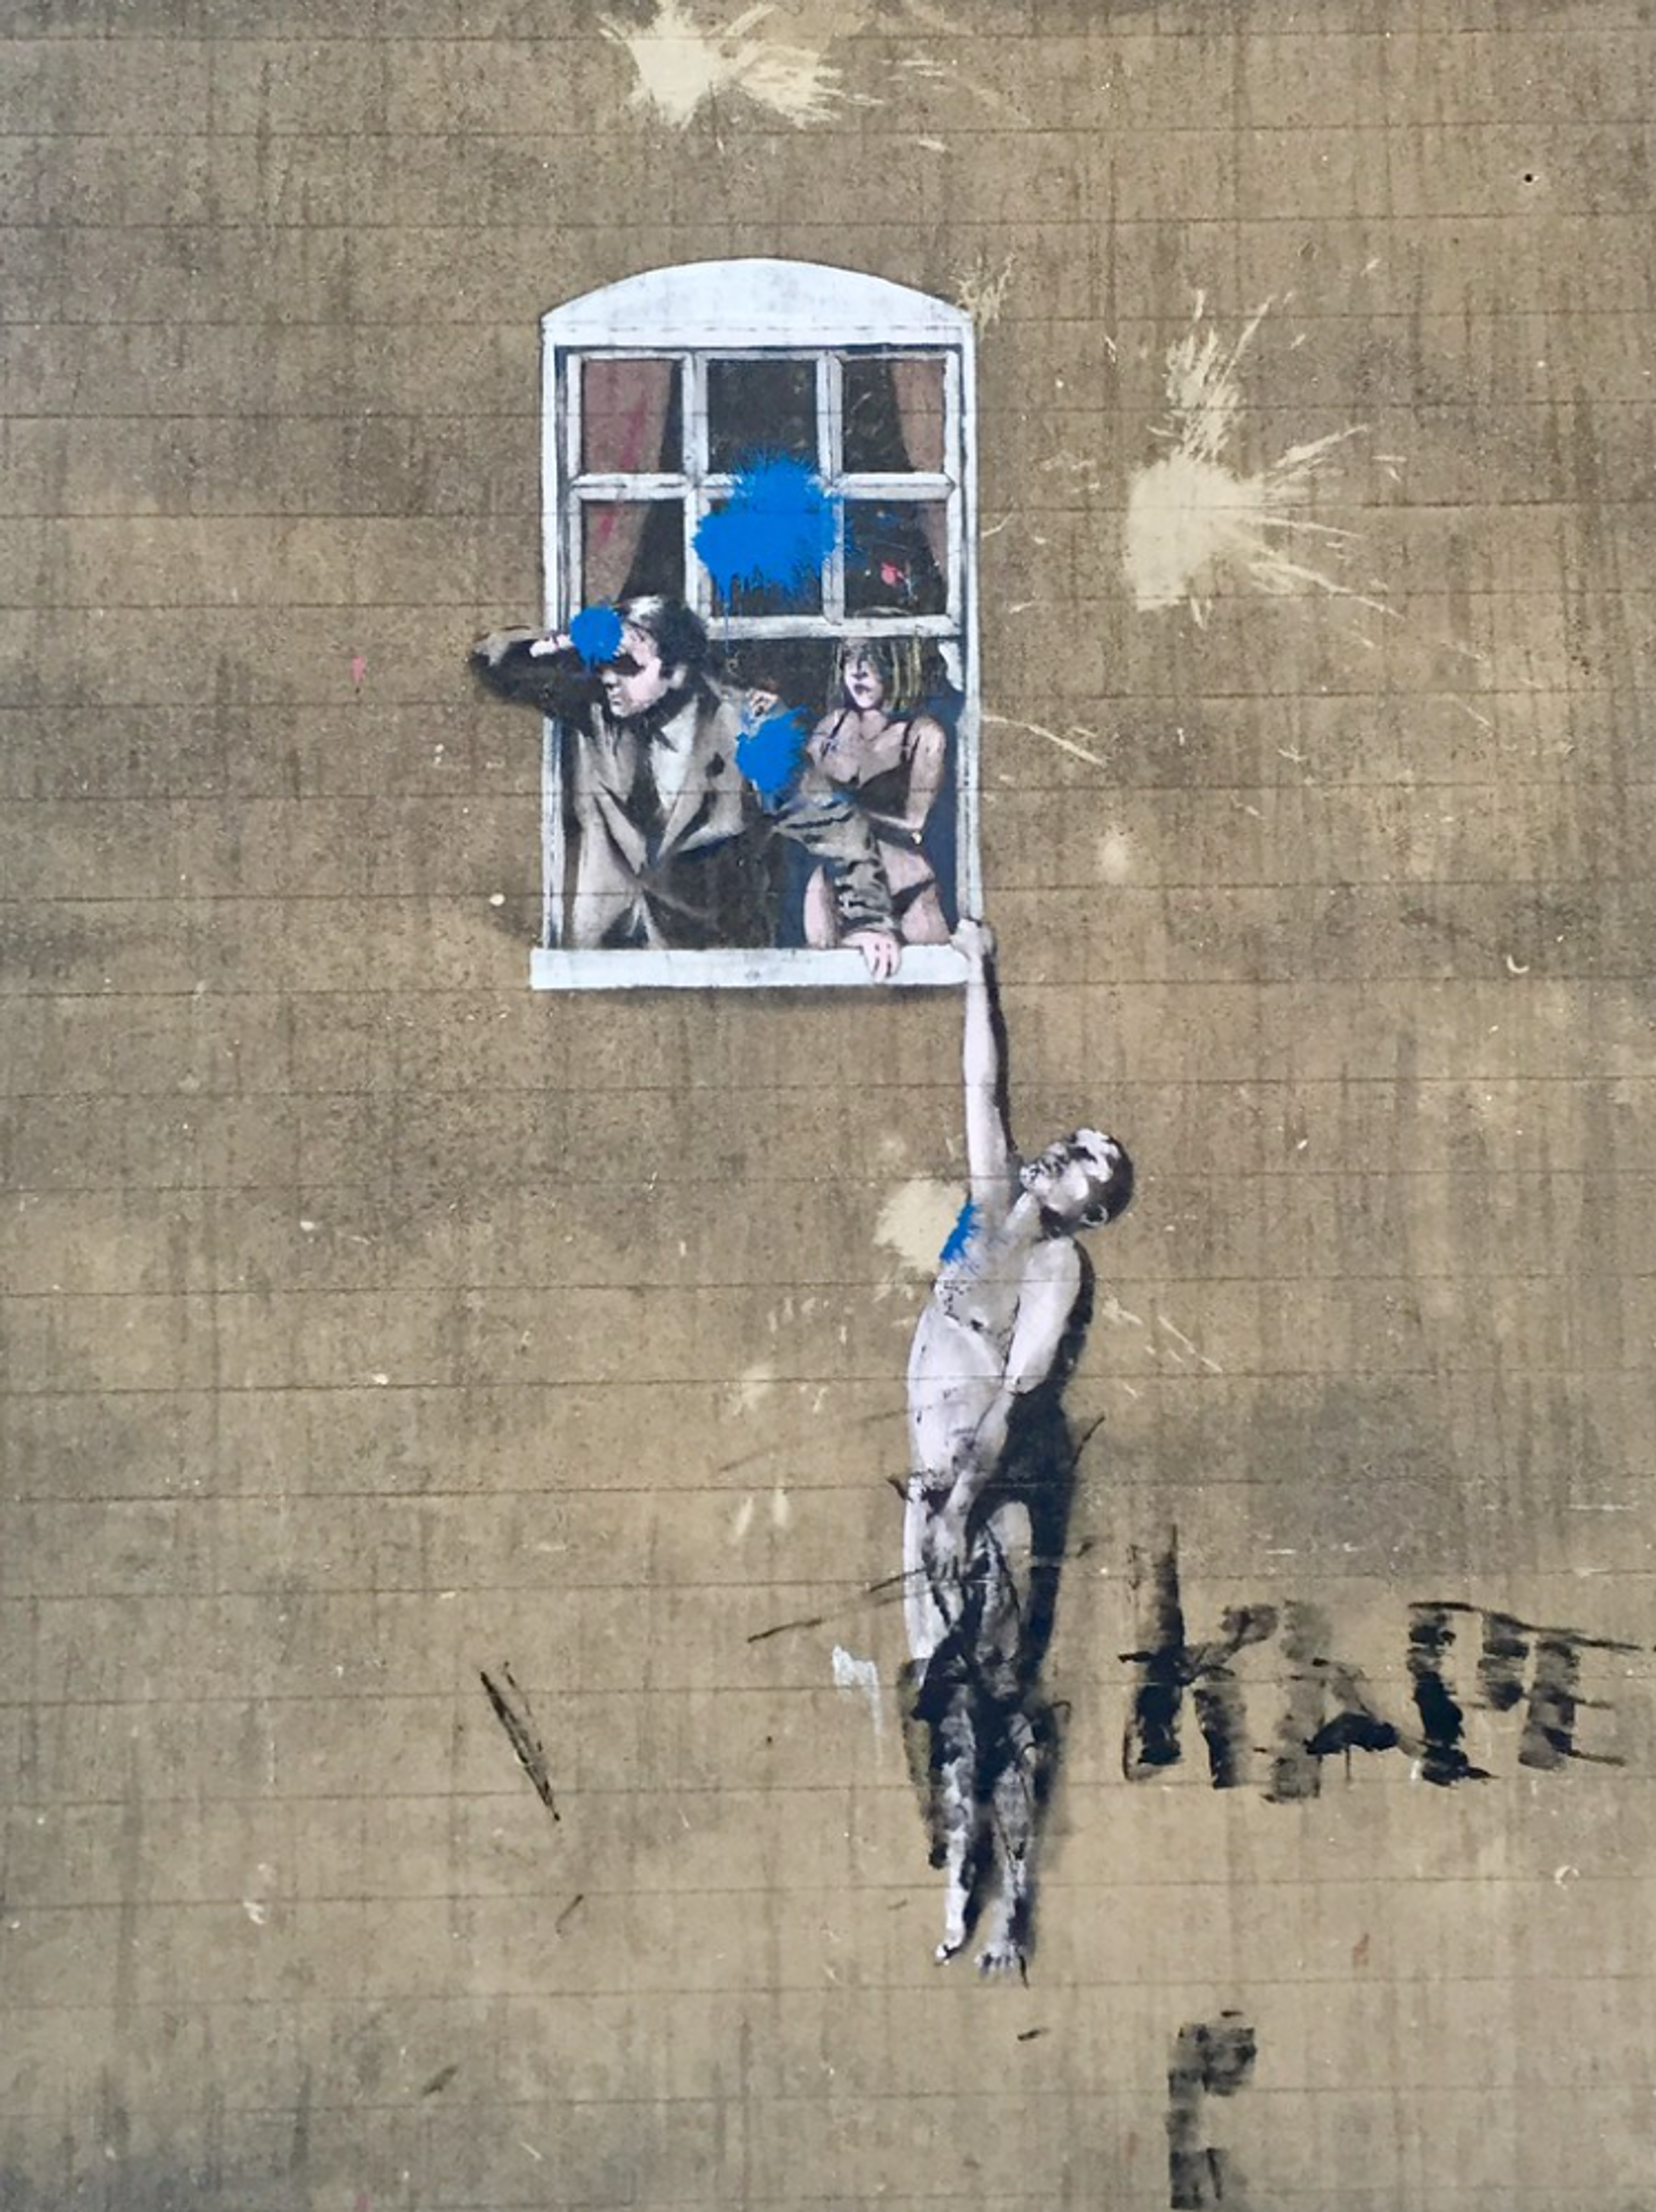 Well Hung Lover by Banksy